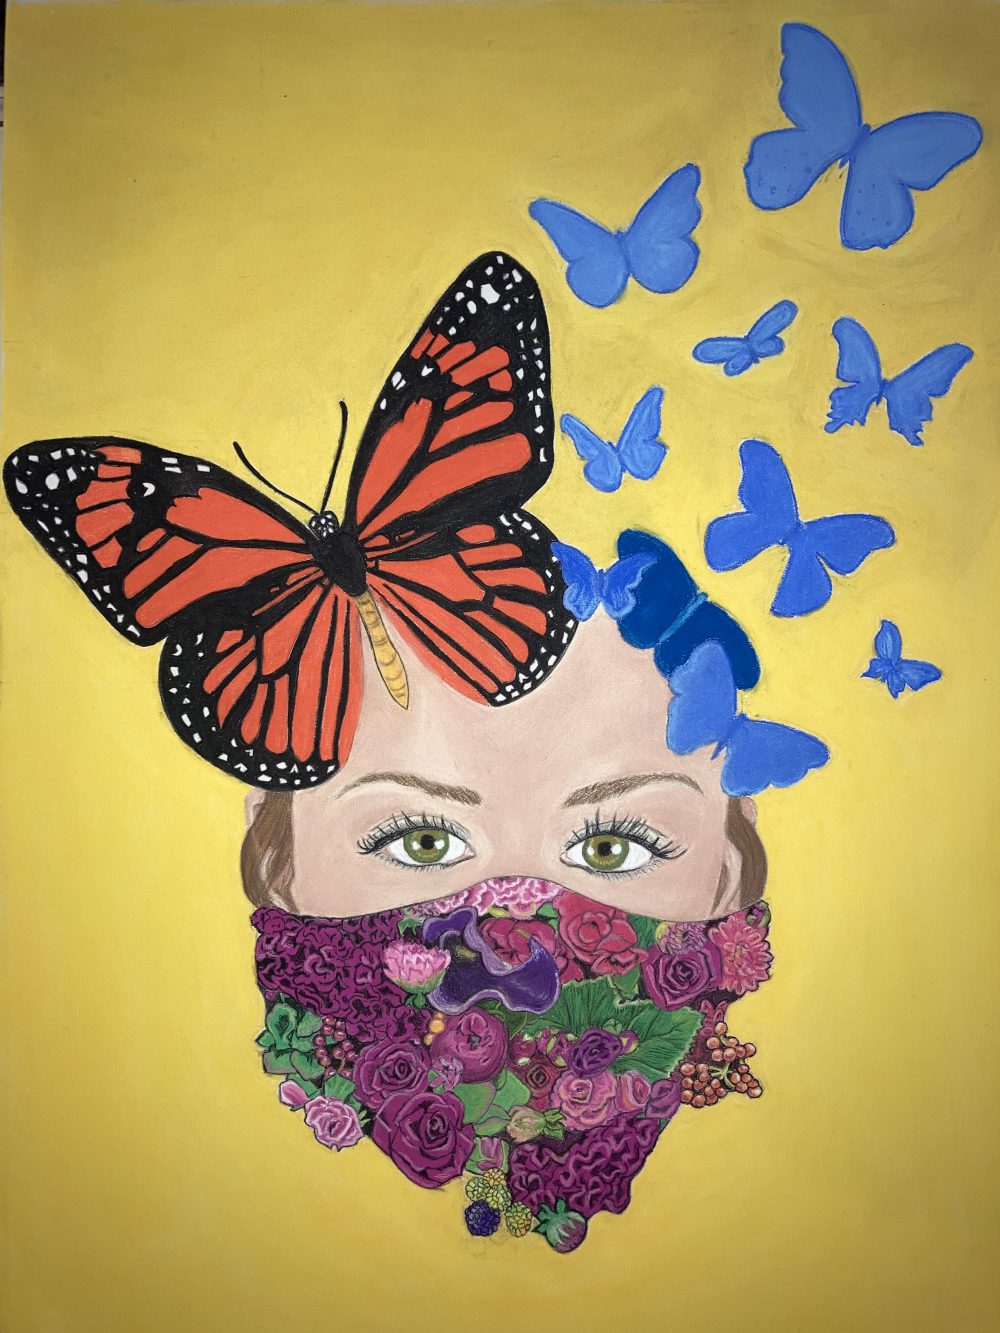 A drawing done in NuPastels of a face of a woman with a mask of flowers and butterflies atop her head.